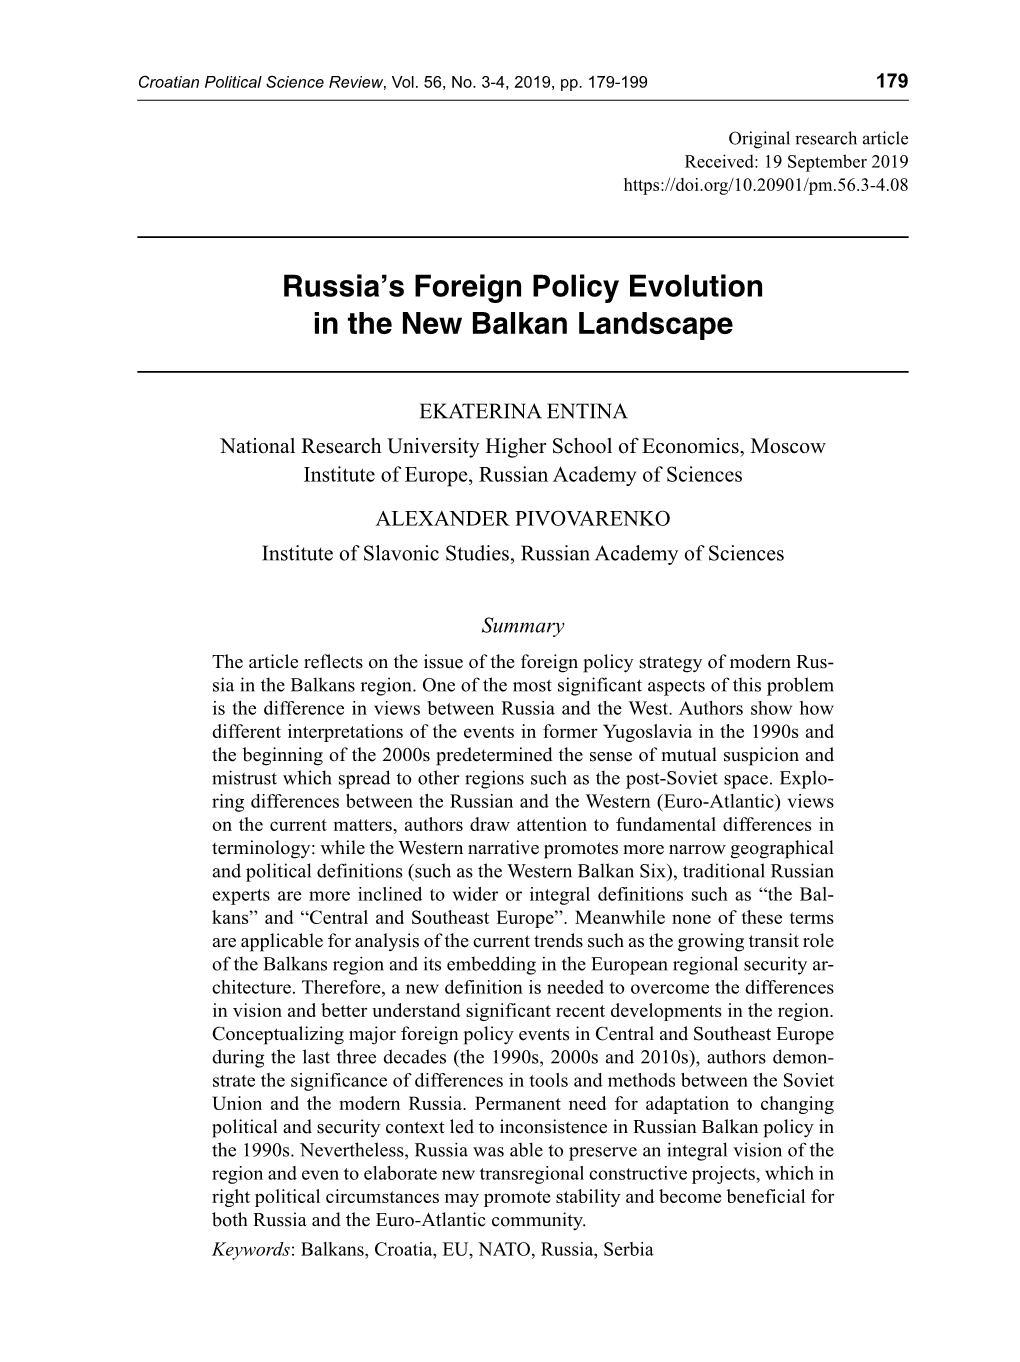 Russia's Foreign Policy Evolution in the New Balkan Landscape